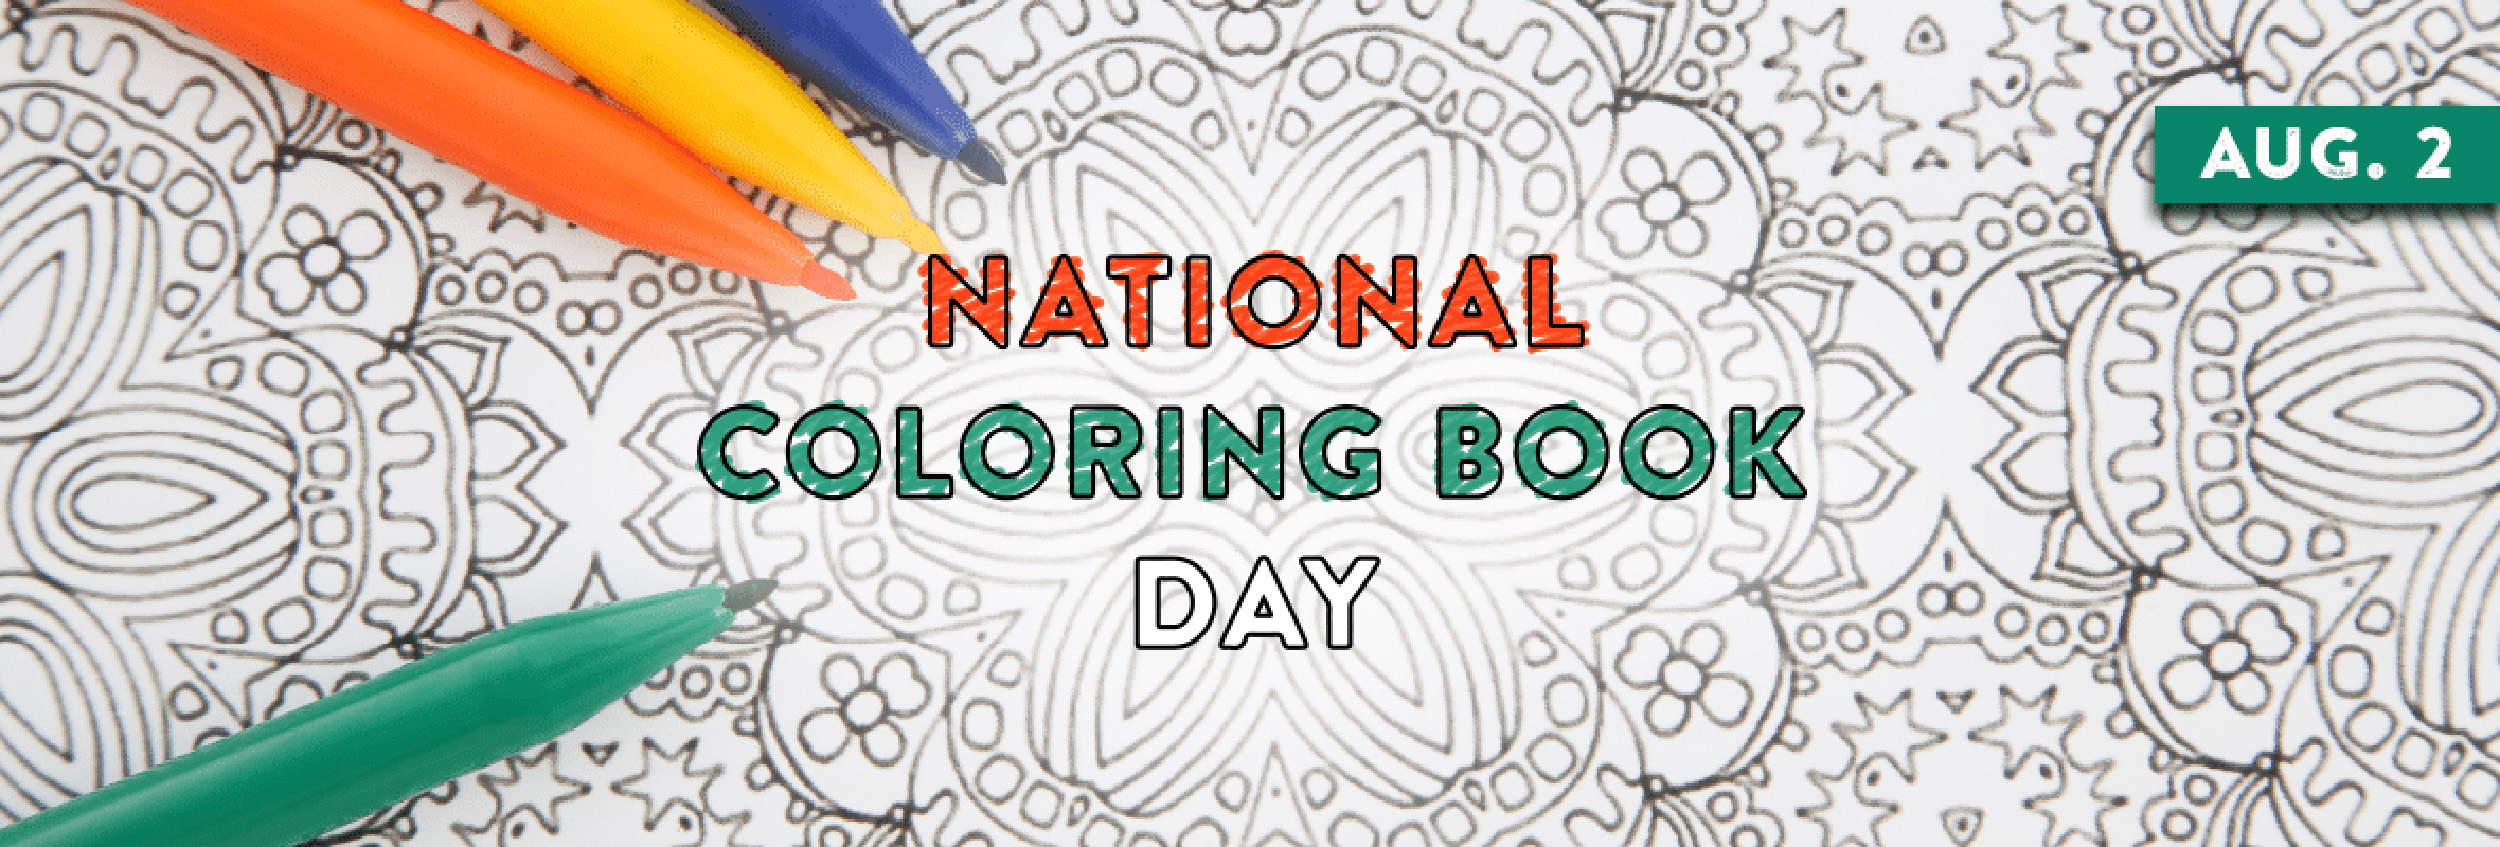 National Coloring Book Day FWS.gov